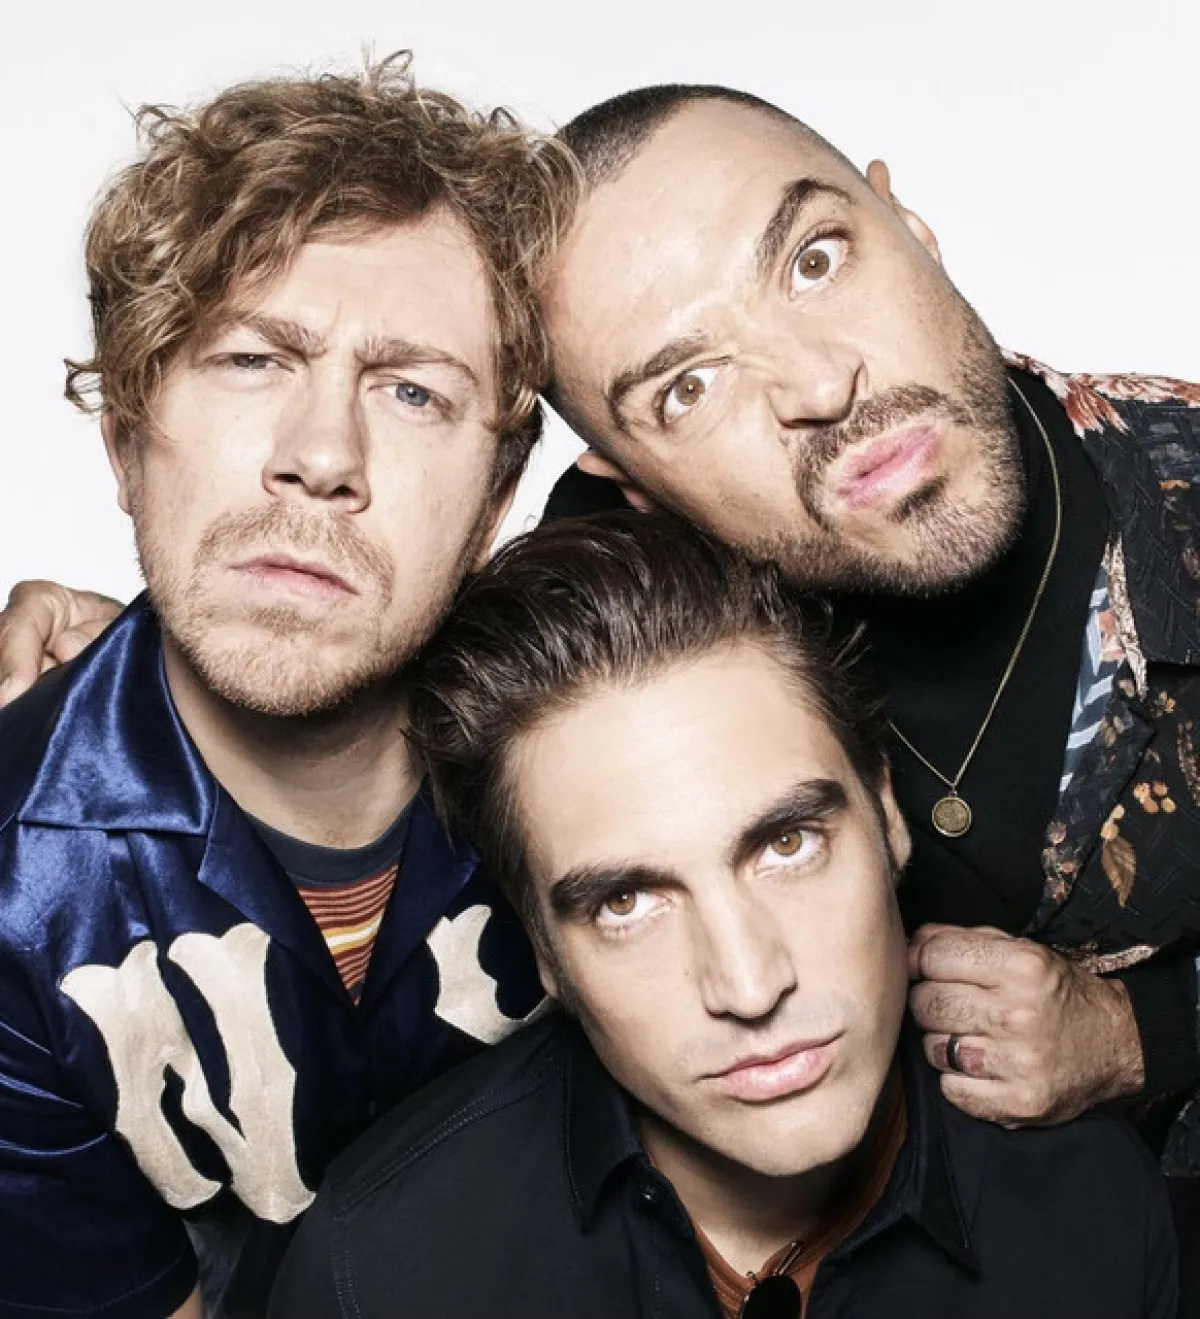 Busted al Dreamland Margate Tickets